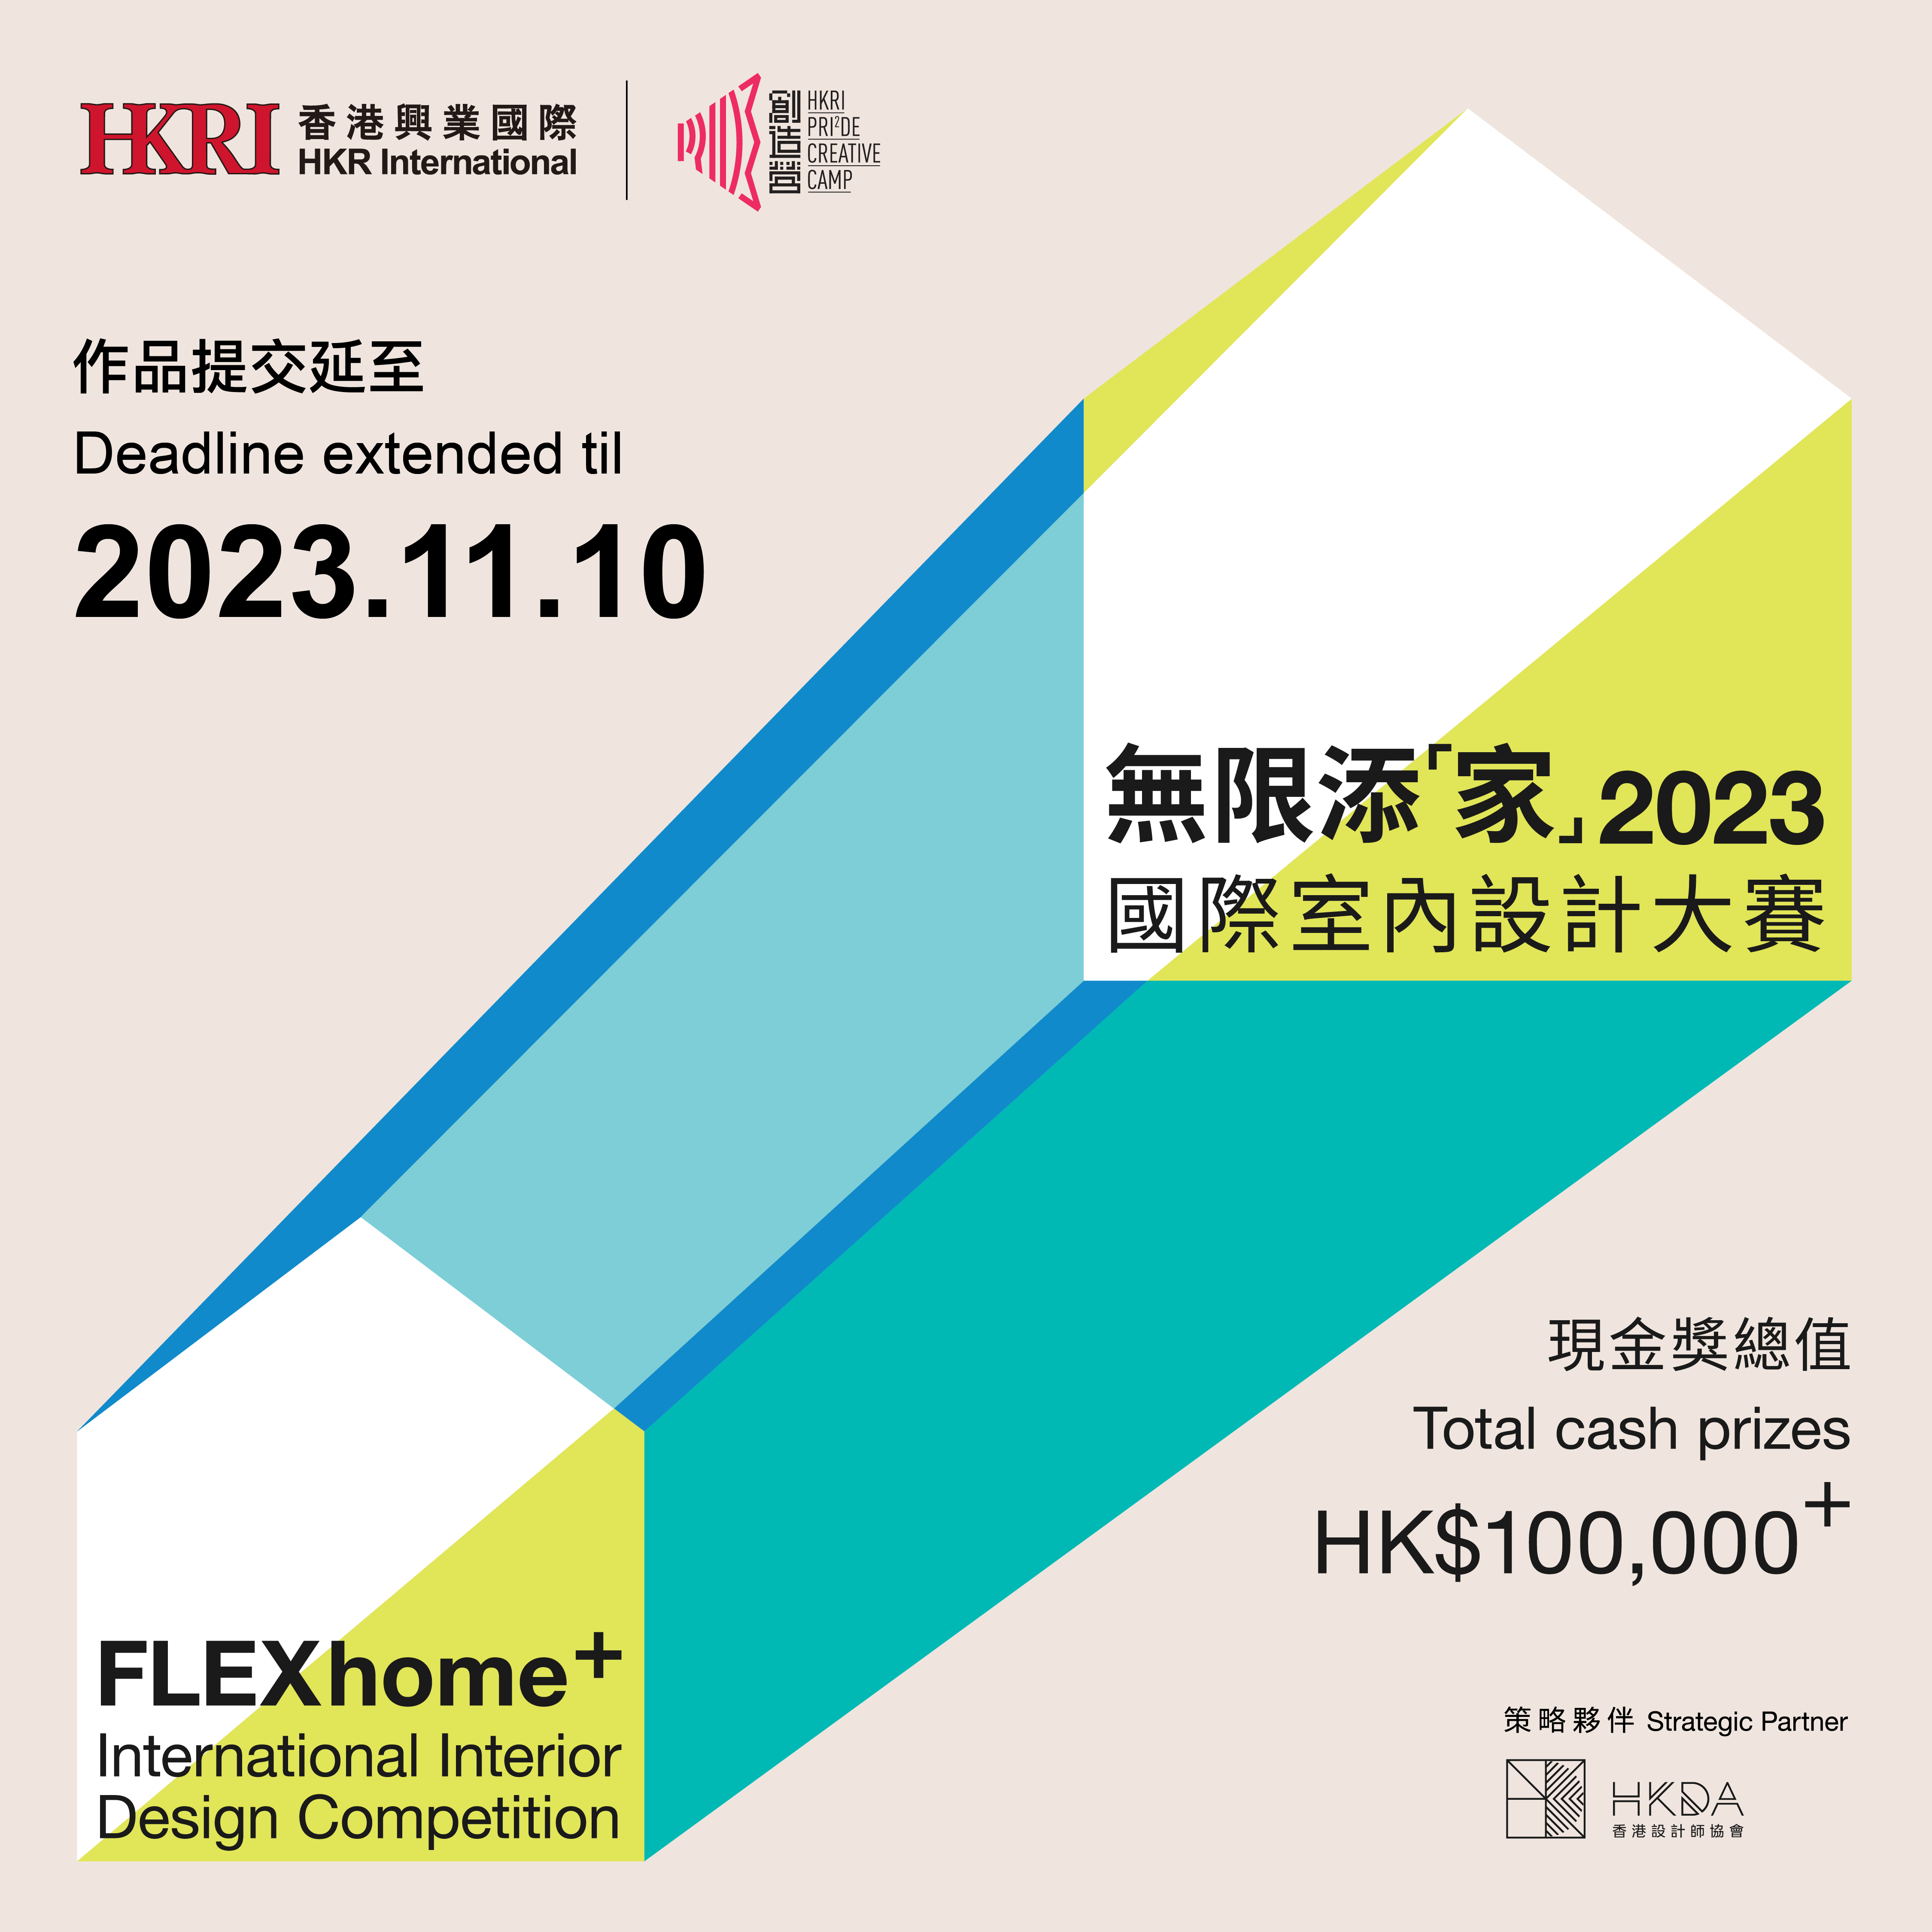 Supporting Event - FLEXhome+ International Interior Design Competition 2023 | Extension of Submission Deadline to 10 NOVEMBER